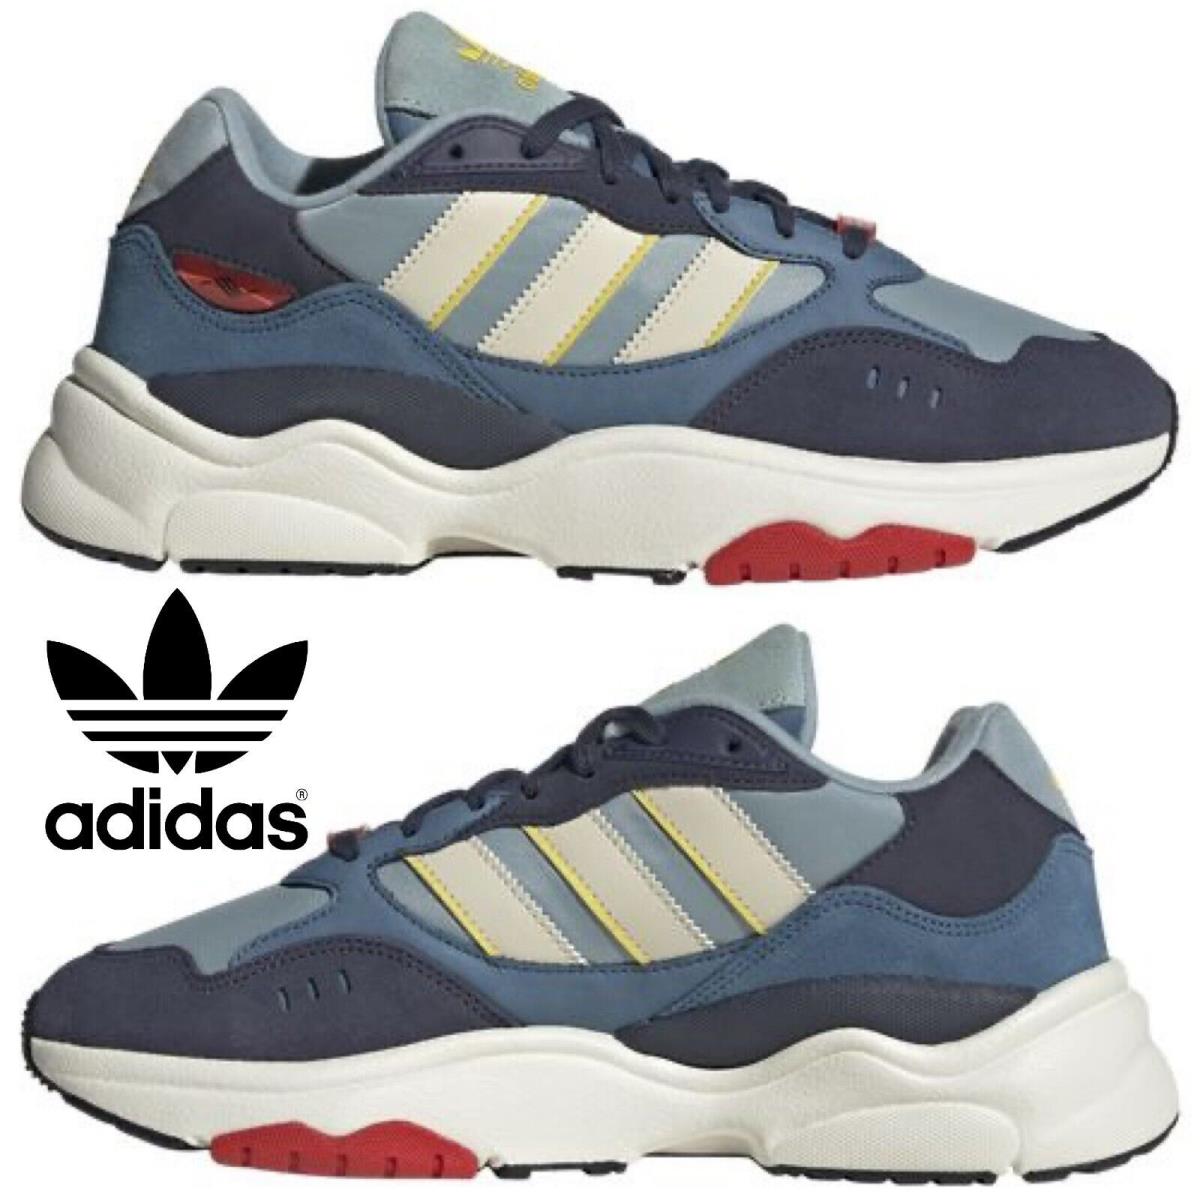 Adidas Retropy F90 Men`s Sneakers Running Shoes Gym Casual Sport Gray Navy